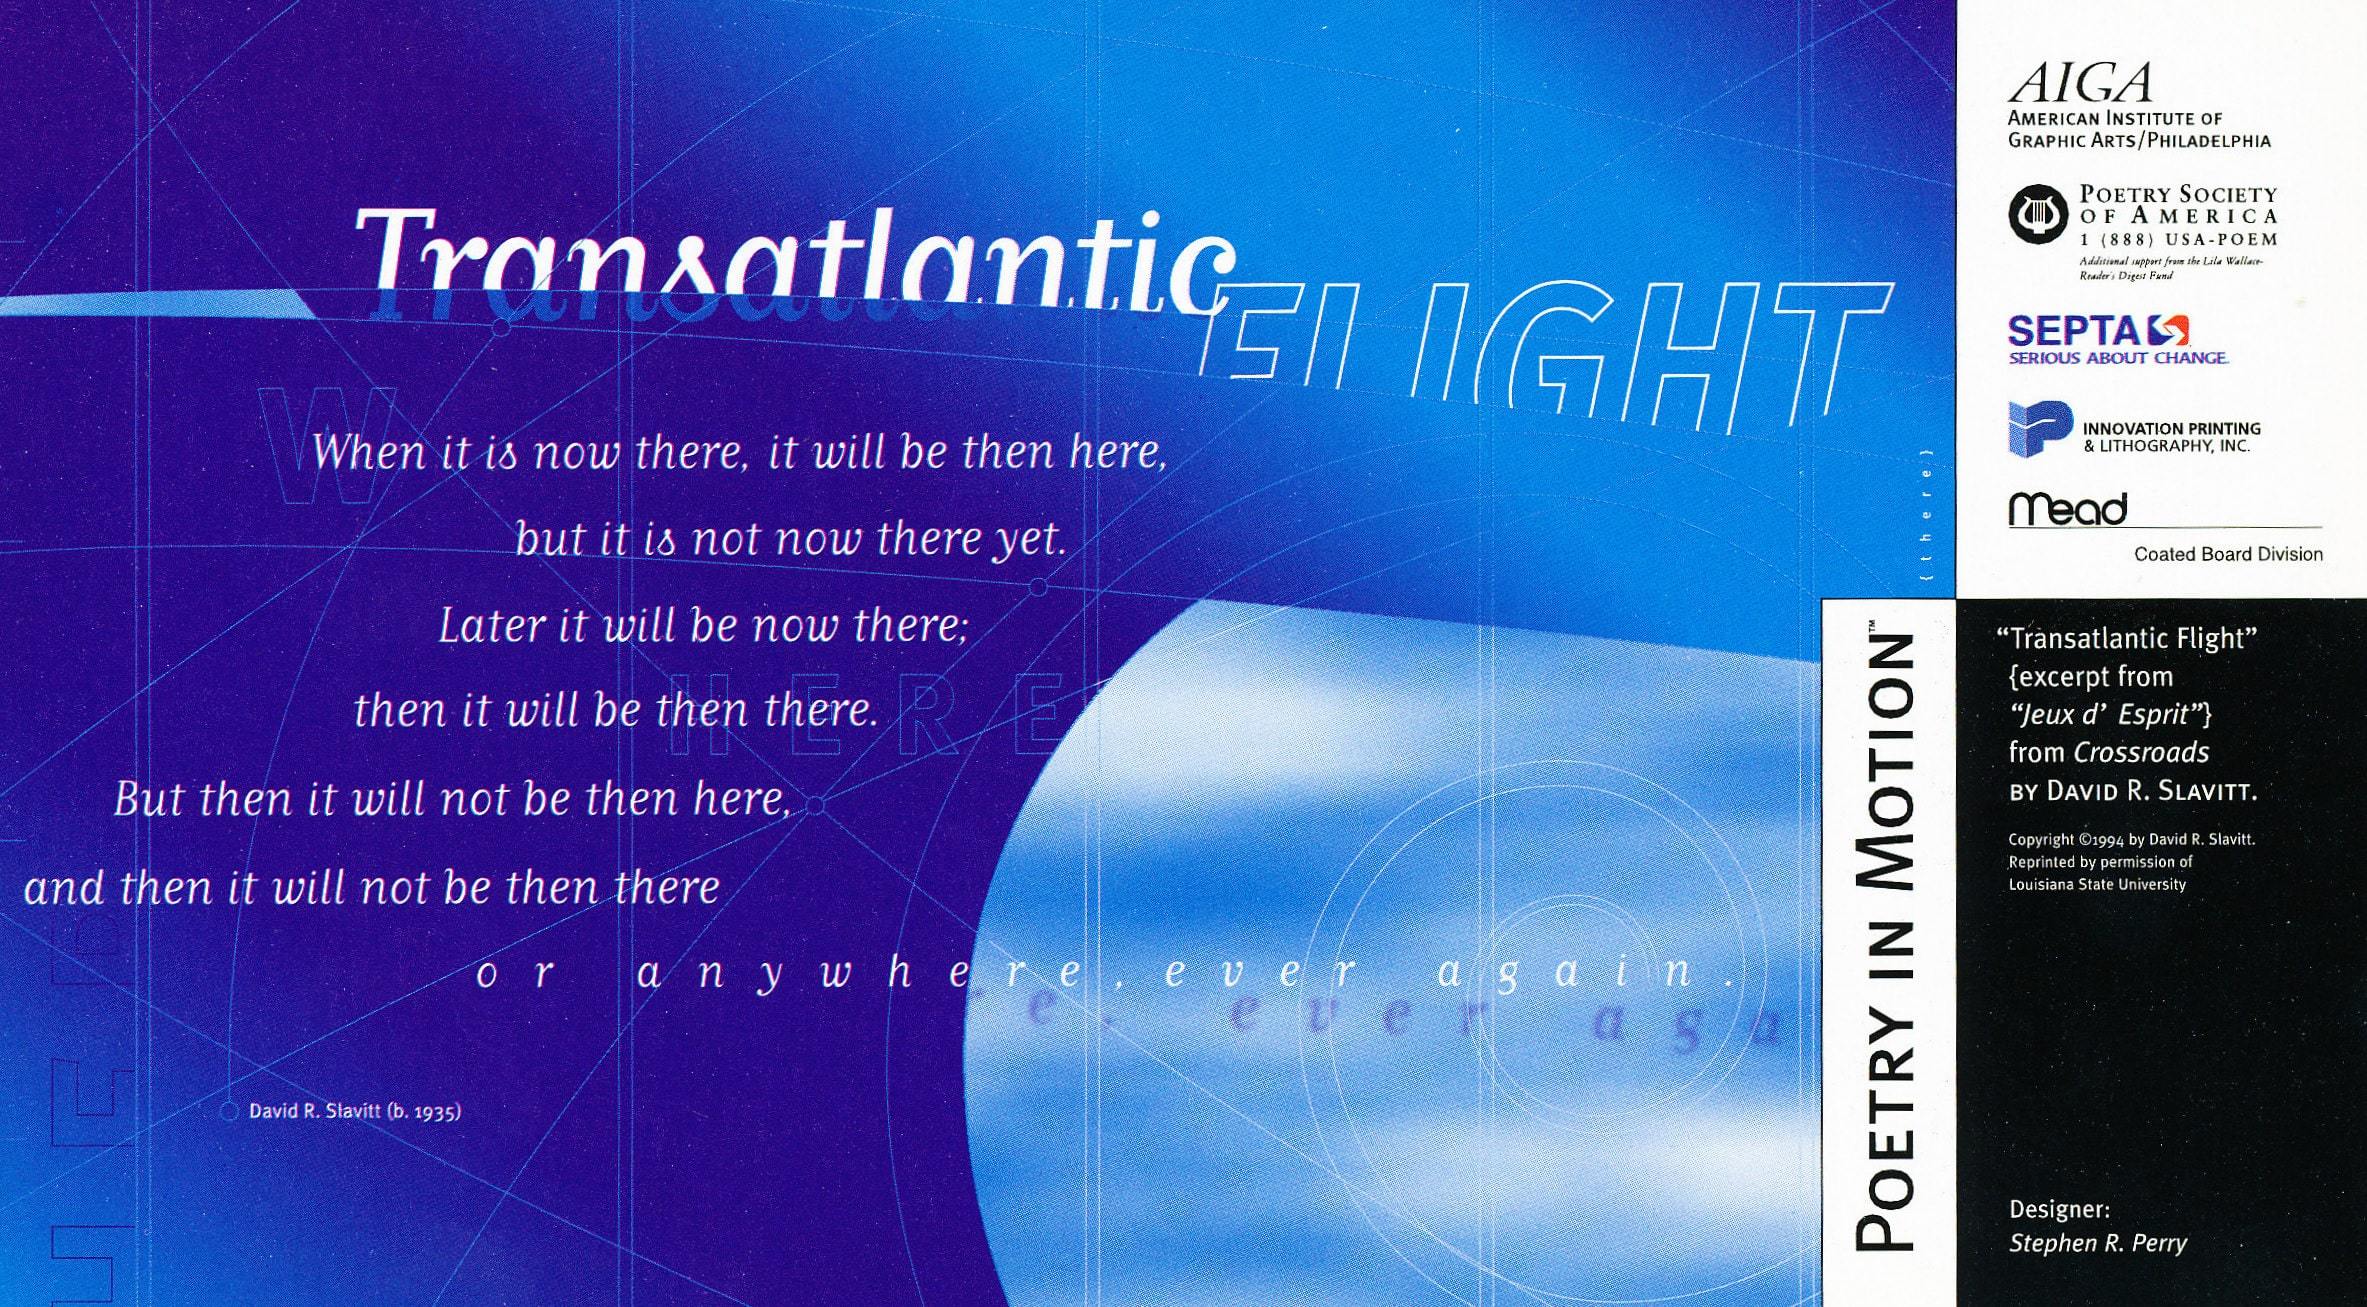 A vertical poster features an abstract, futuristic design in shades of blue. The poem Transatlantic Flight by David Slavitt is written in white text.